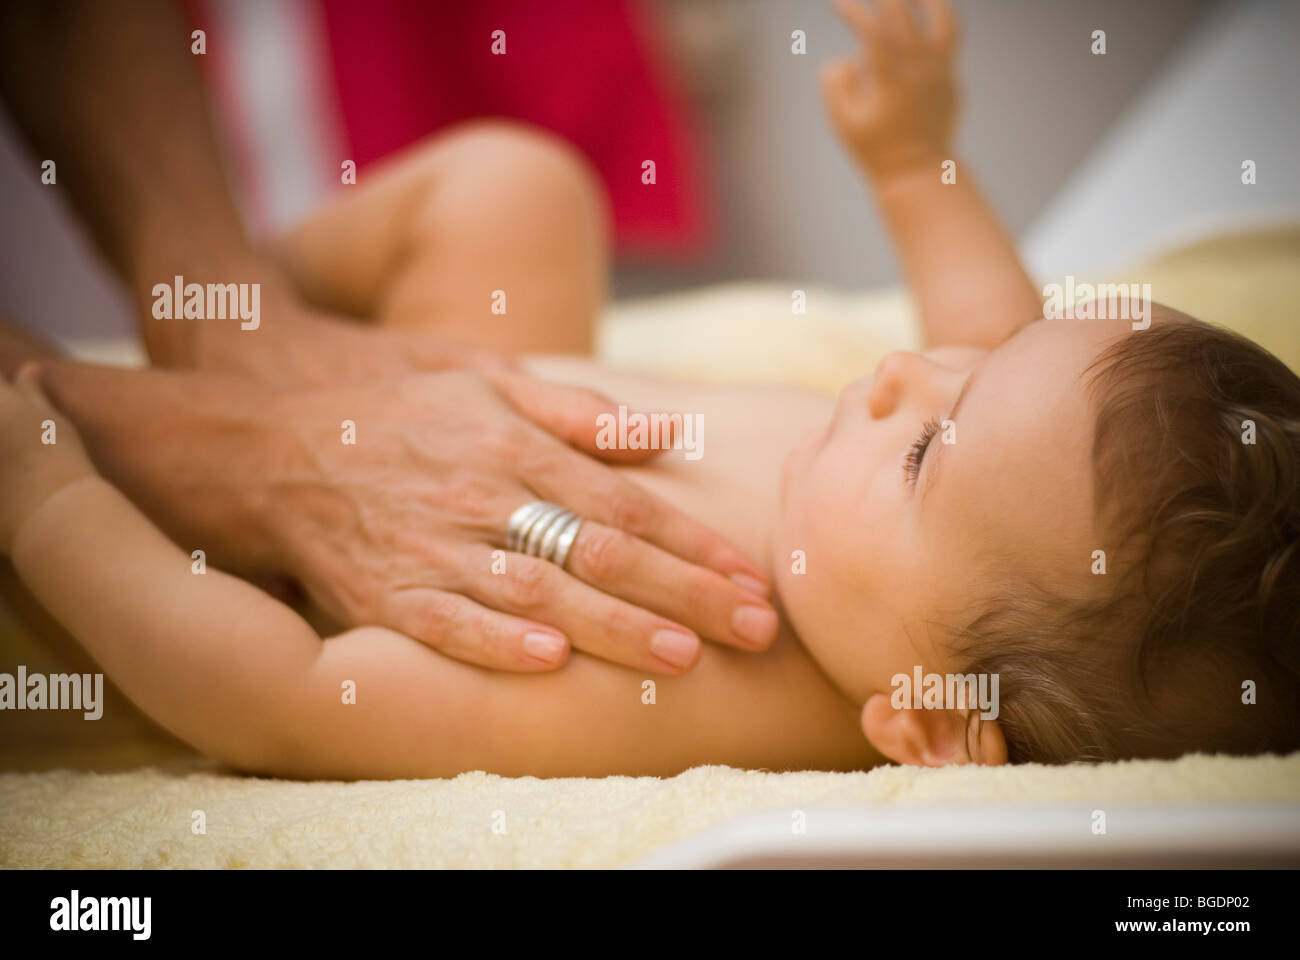 Mother caring for child Stock Photo